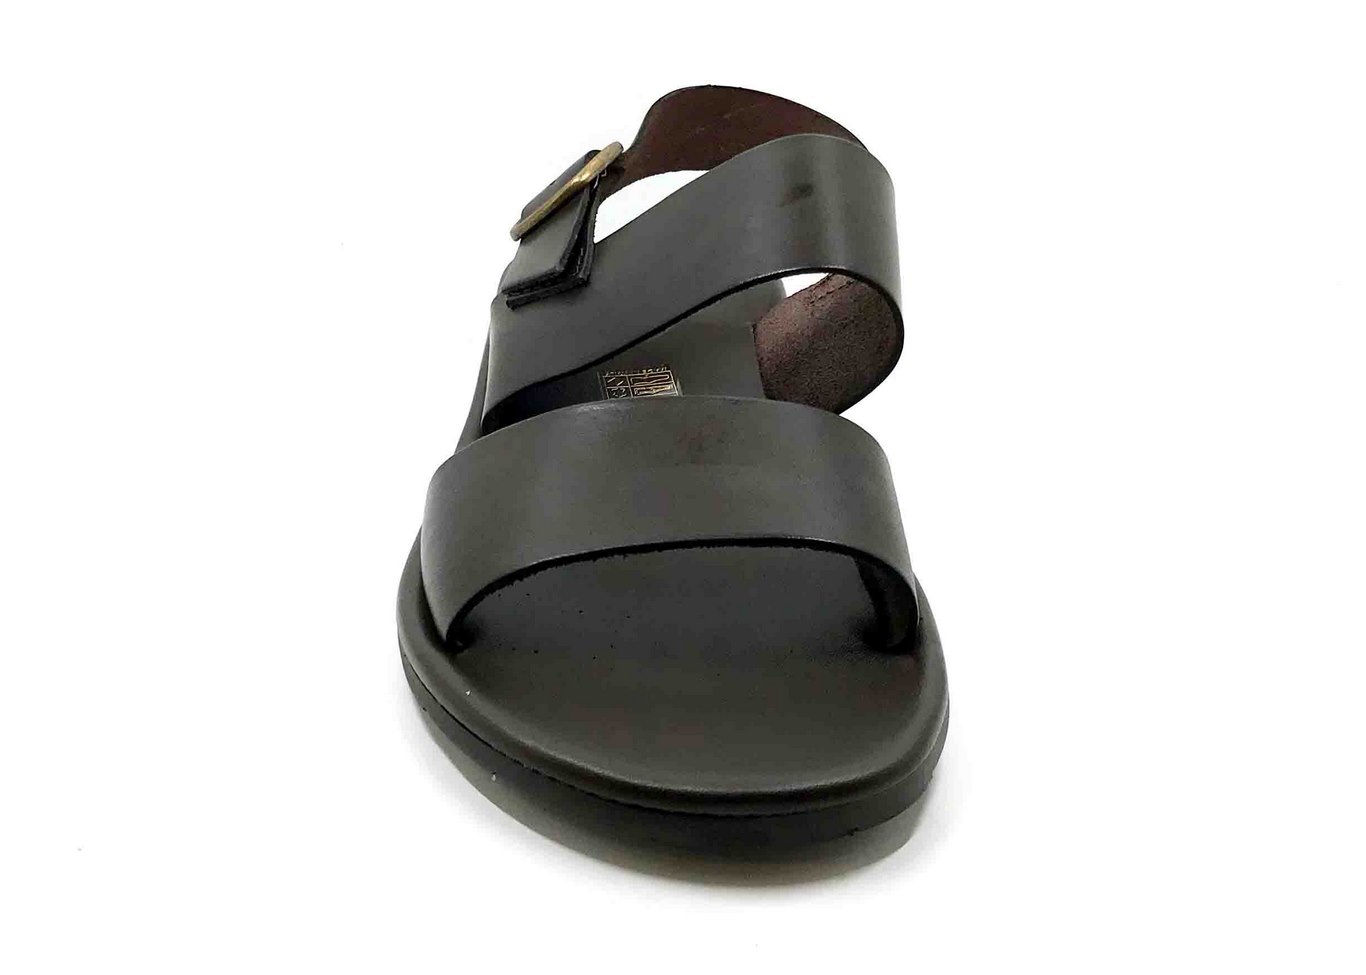 Padded sole Sandals in Brown cowhide leather